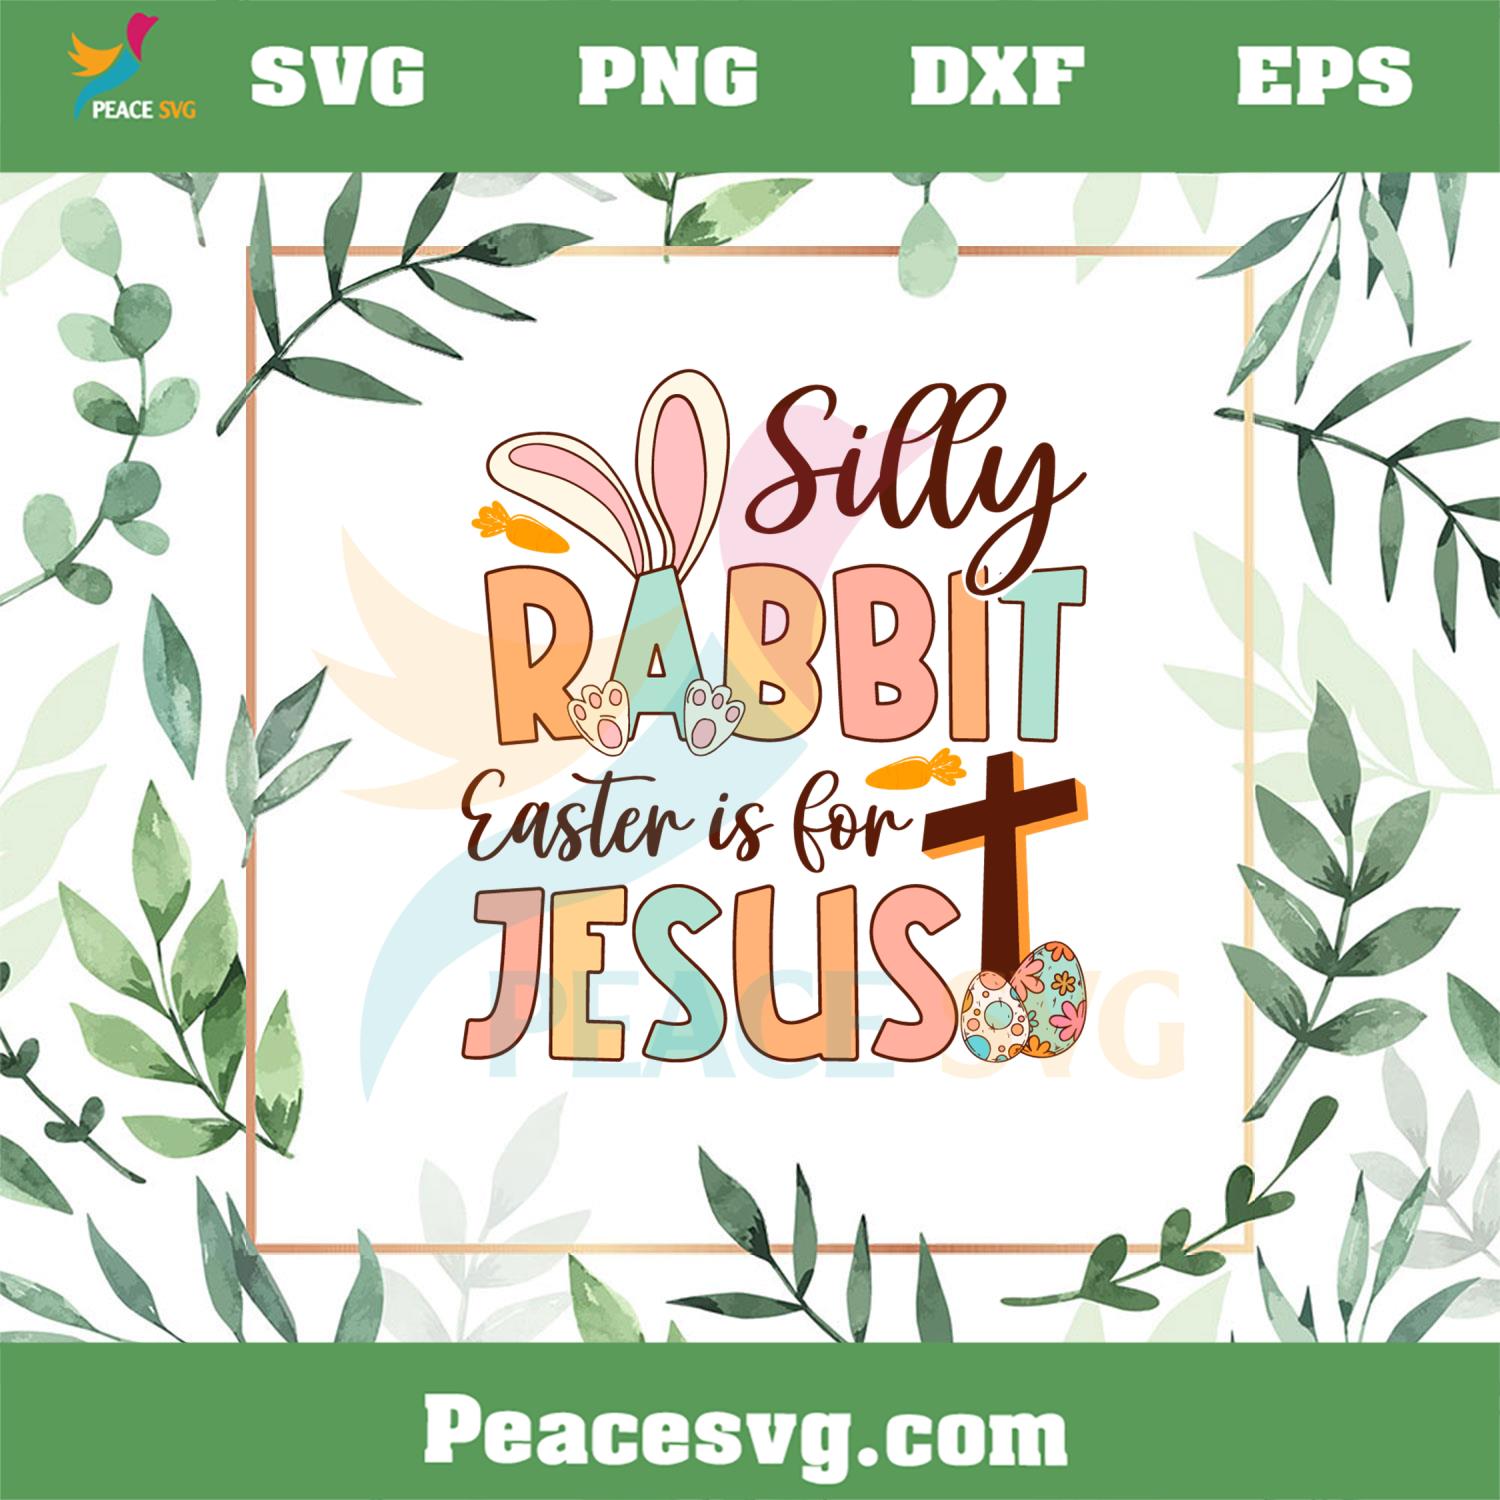 Silly Rabbit Easter Is For Jesus Funny Easter Bunny Svg Cutting Files